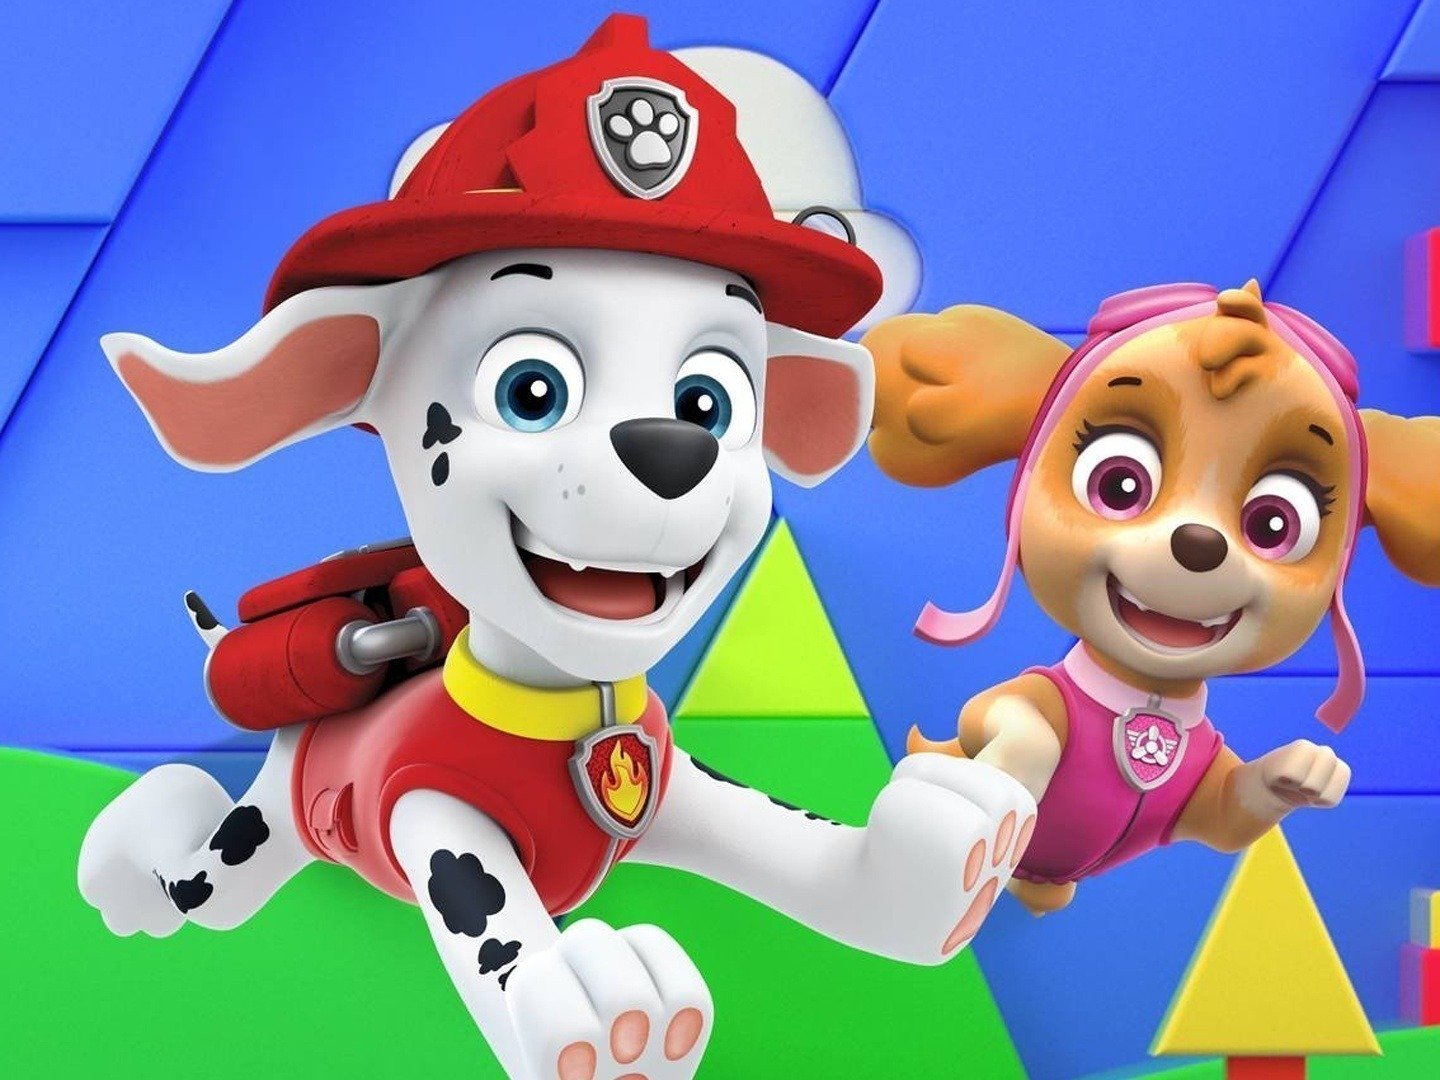 PAW Patrol on TV Season 8 Episode 23 Channels and schedules